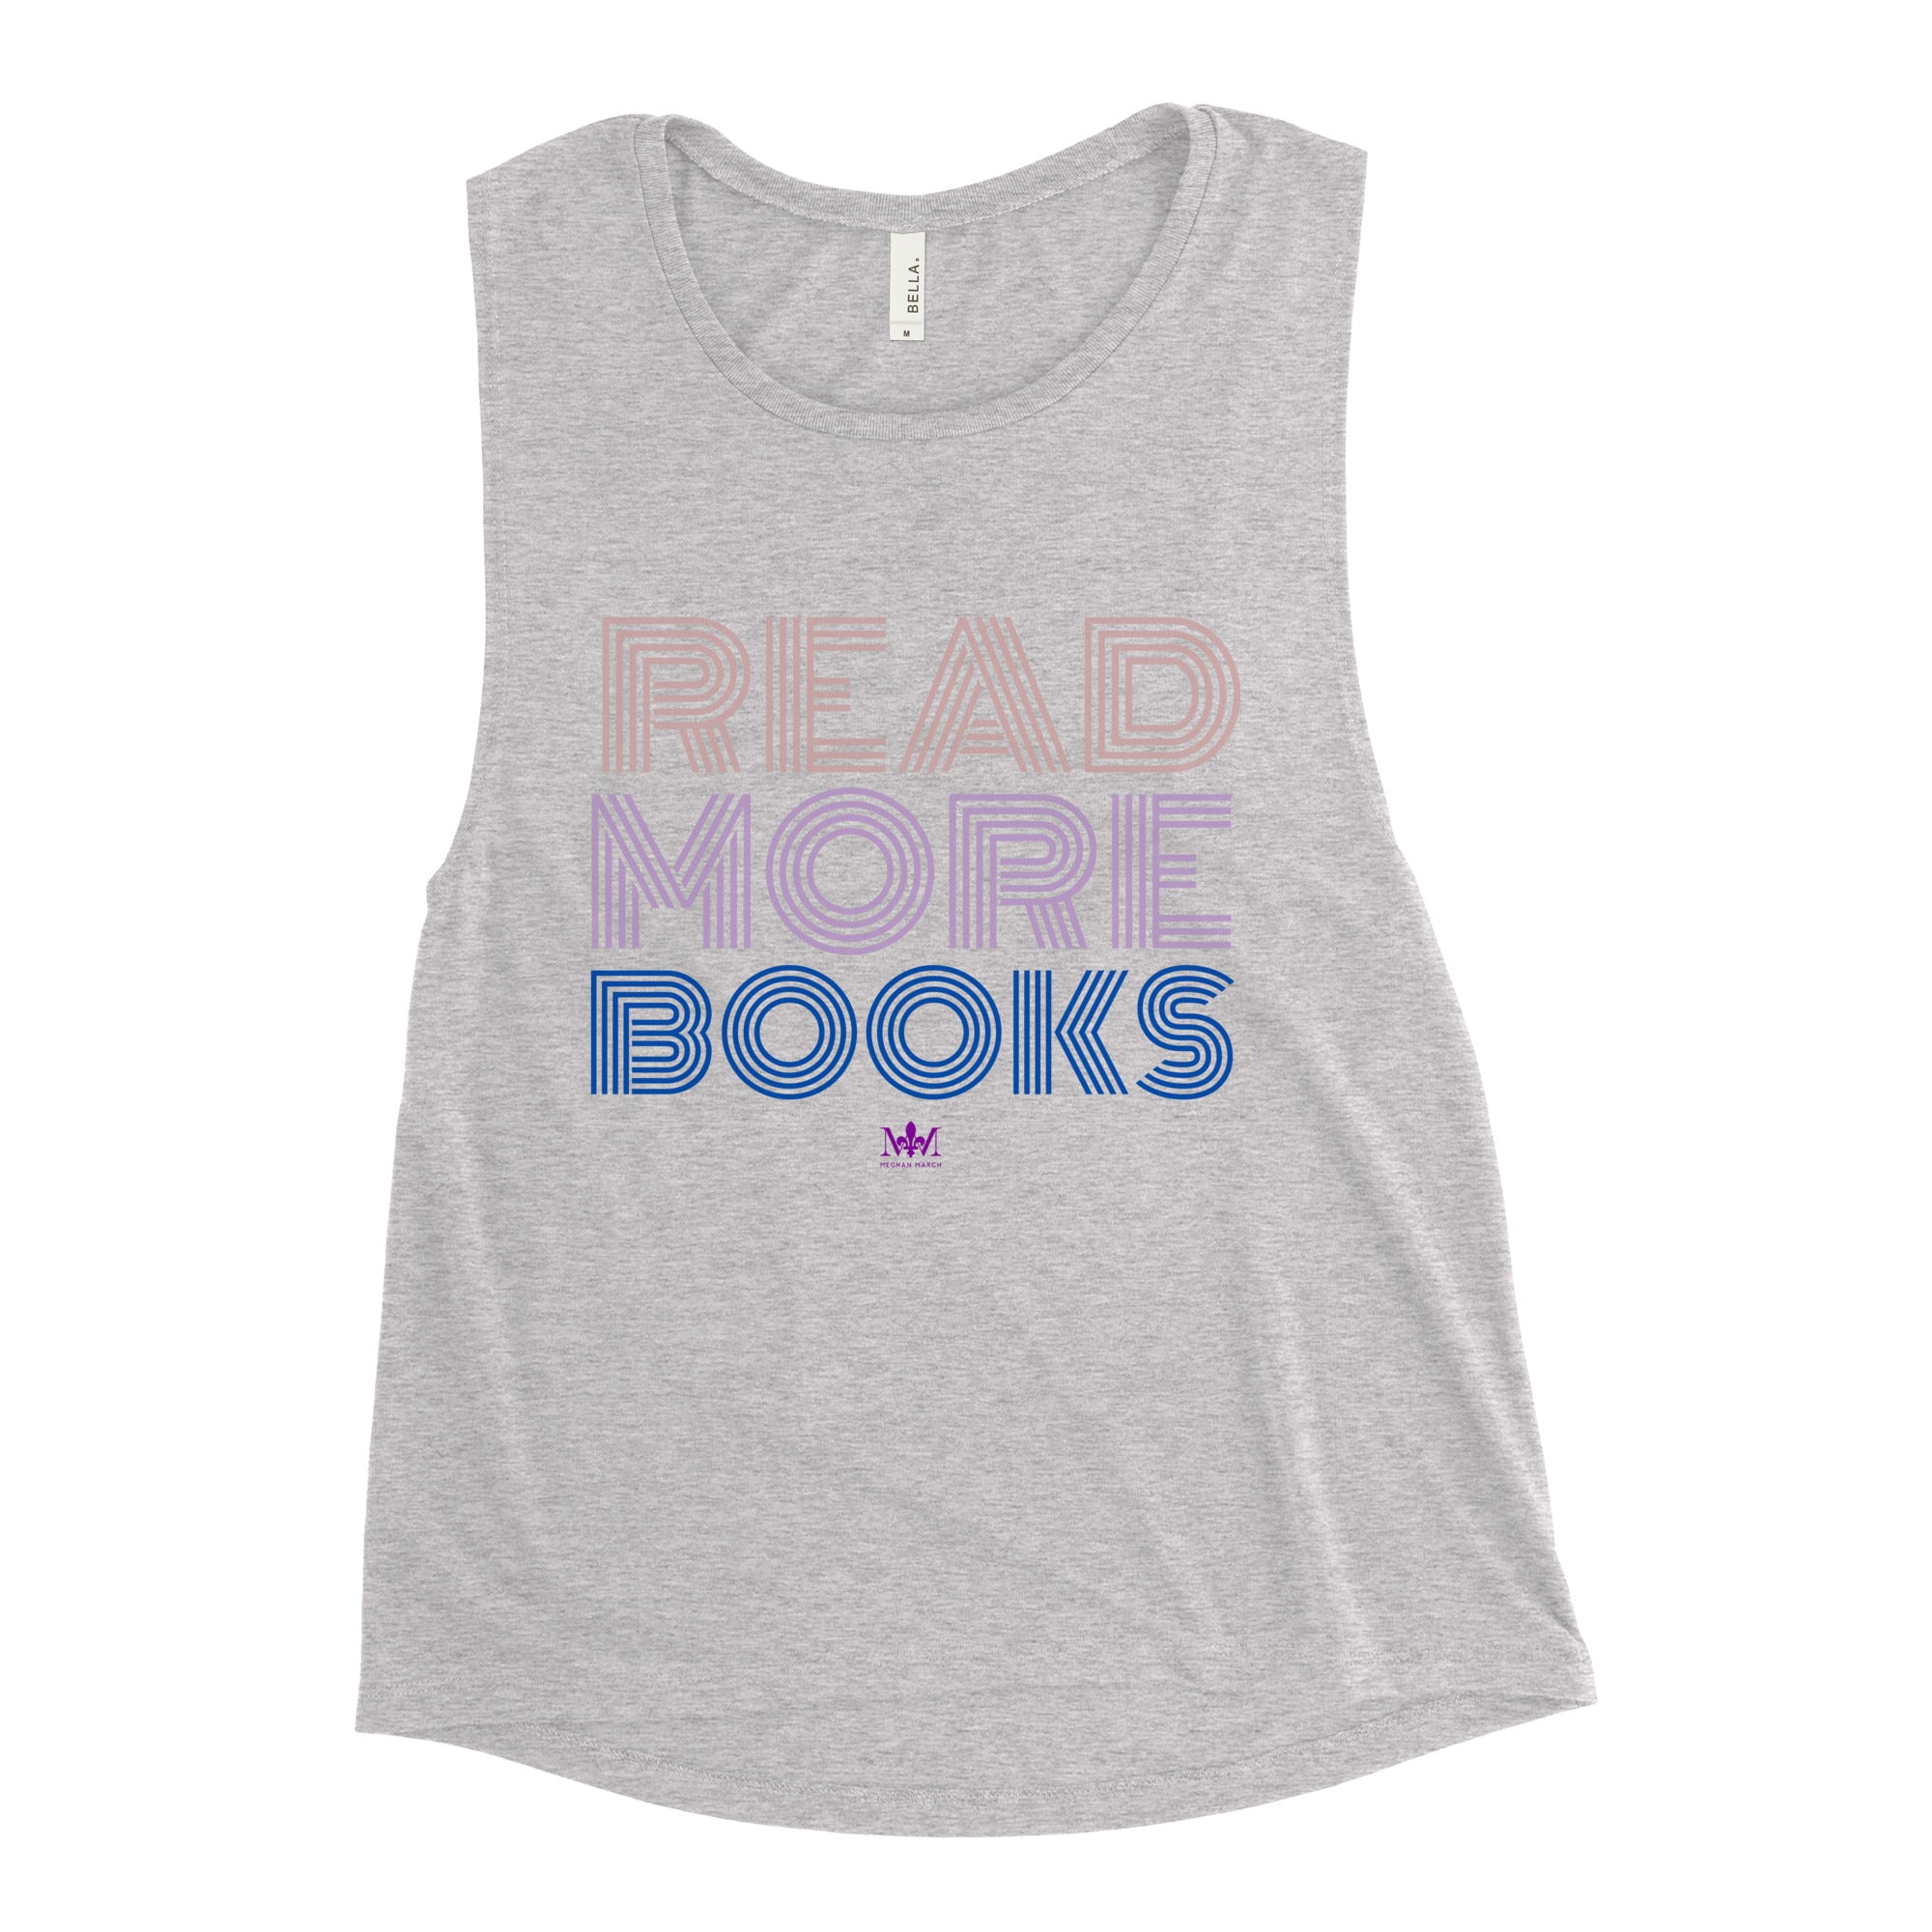 Read More Books Blue Ladies’ Muscle Tank